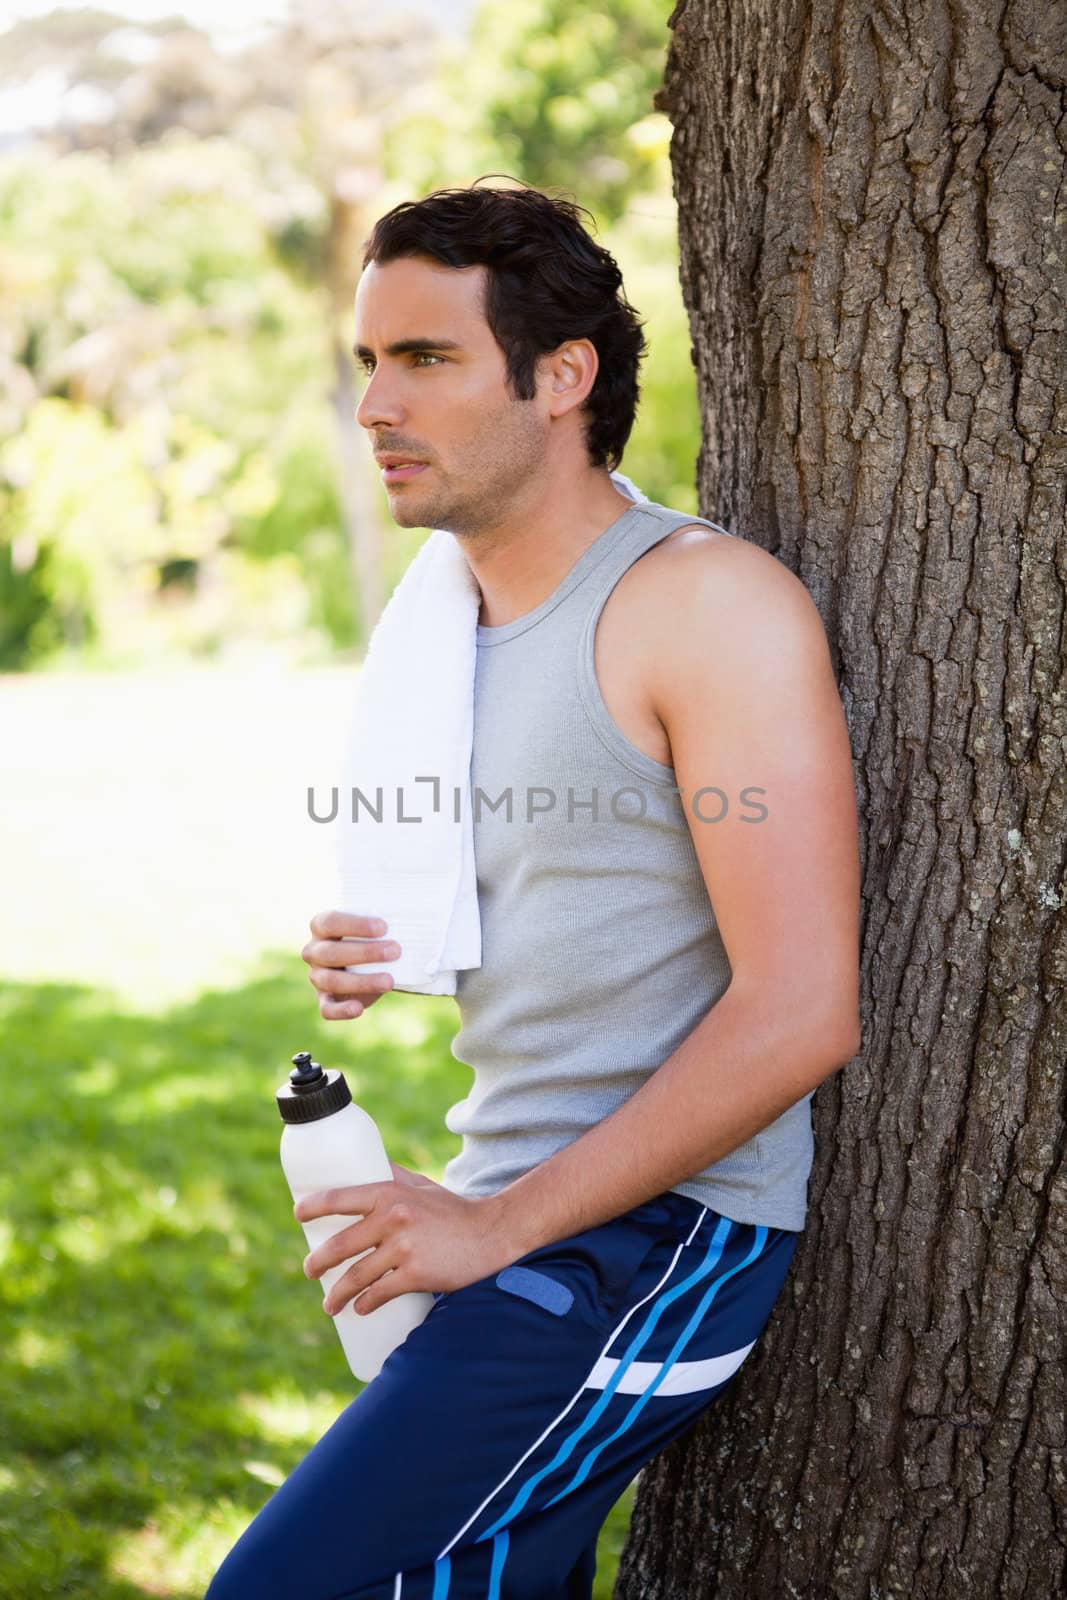 Man with a white towel on his shoulder, holding a sports bottle while leaning against the trunk of a tree